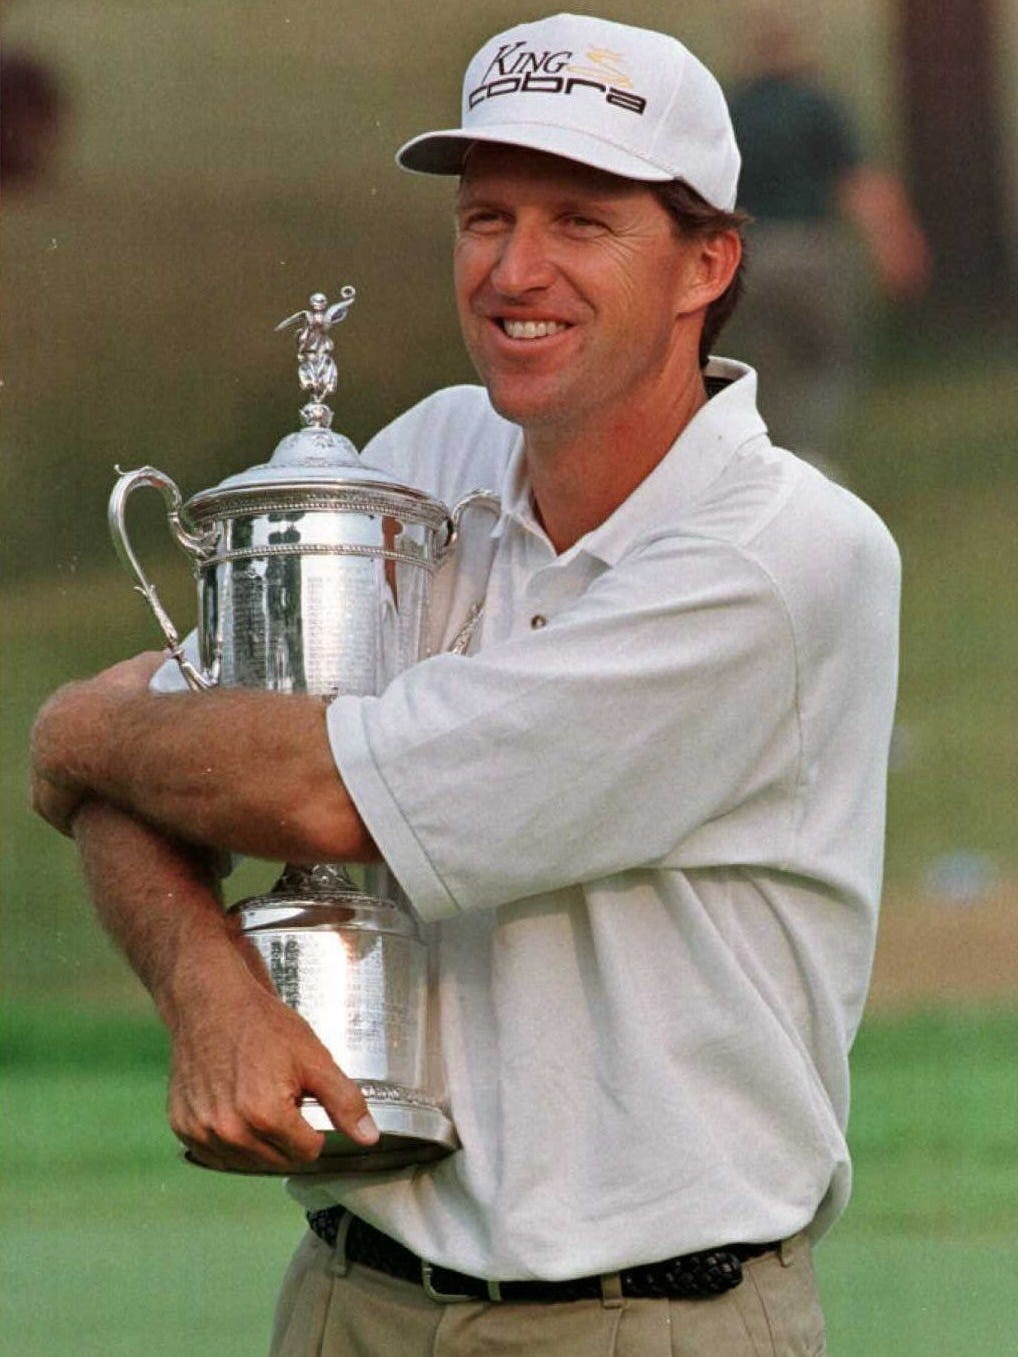 Steve Jones cradles the U.S. Open trophy at the 1996 playing at Oakland Hills.